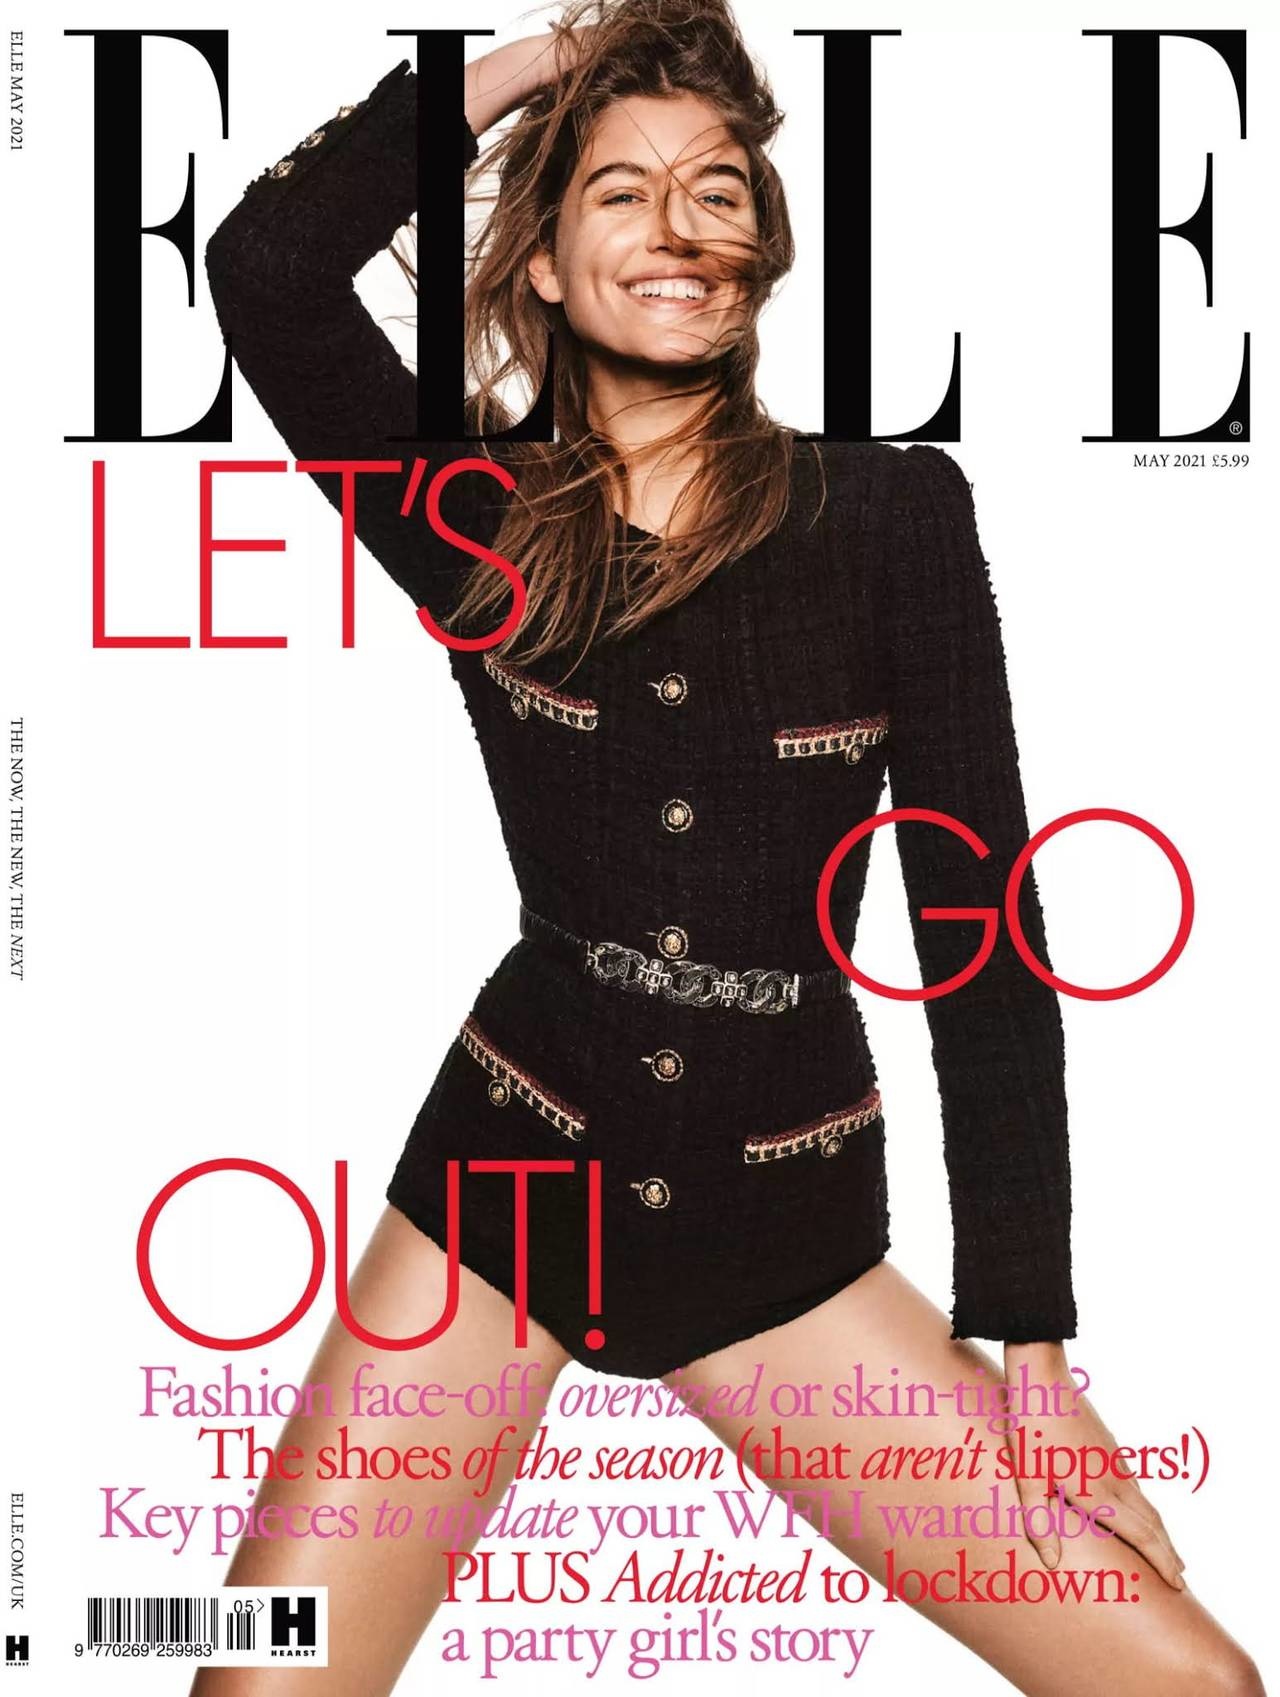 Elle UK May 2021 Cover Story Editorial